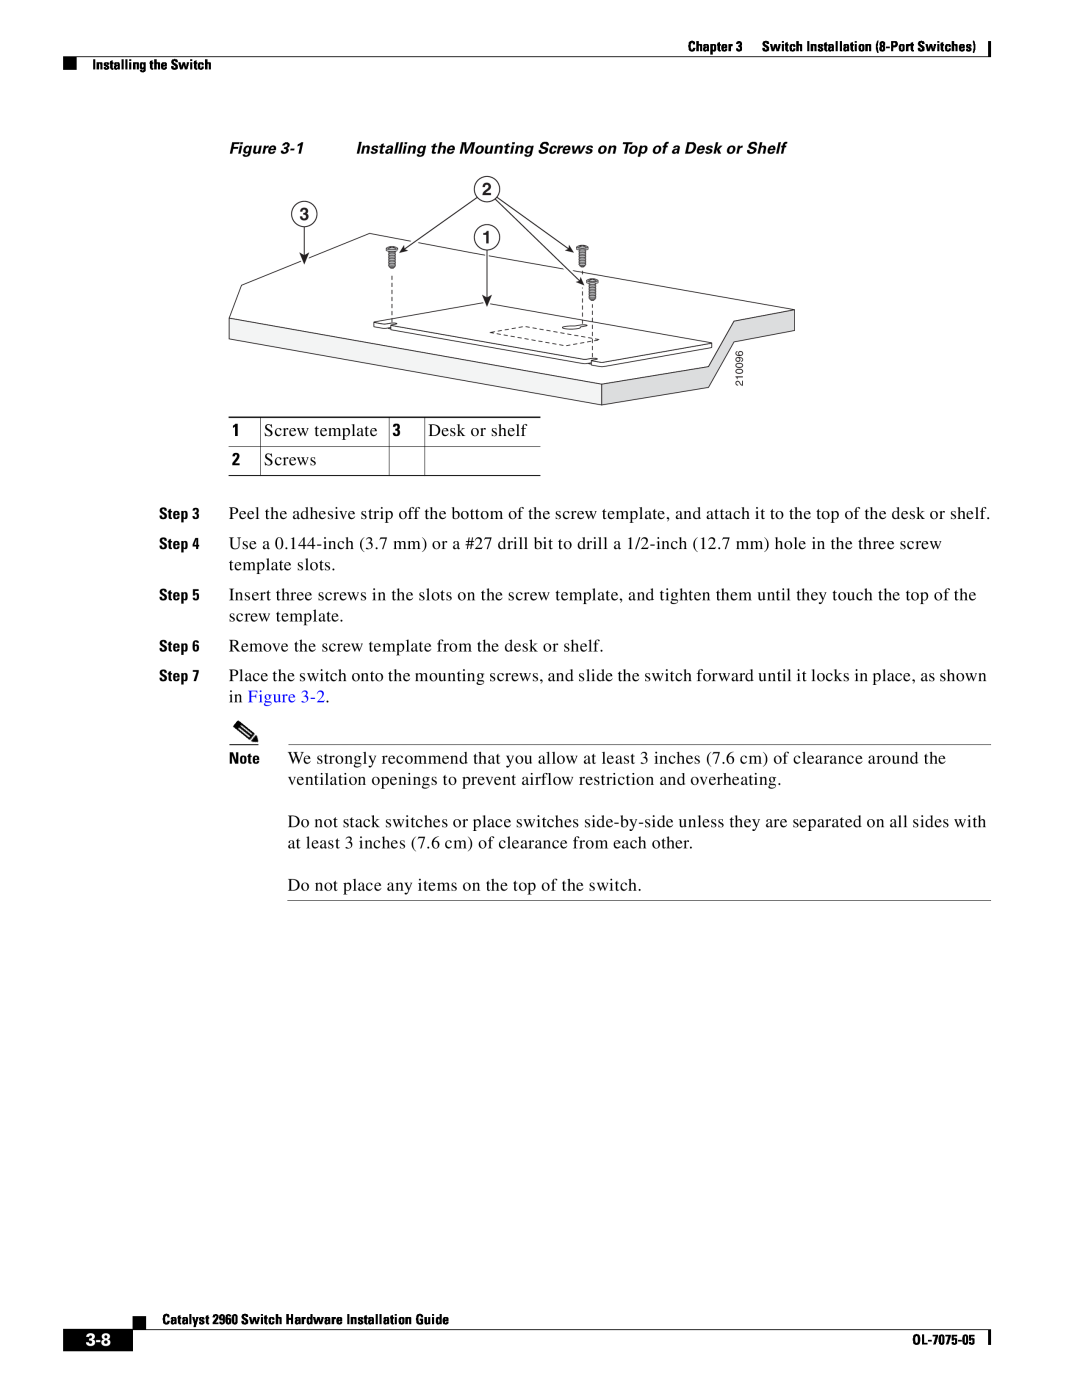 Cisco Systems 2960 specifications 1 Installing the Mounting Screws on Top of a Desk or Shelf 